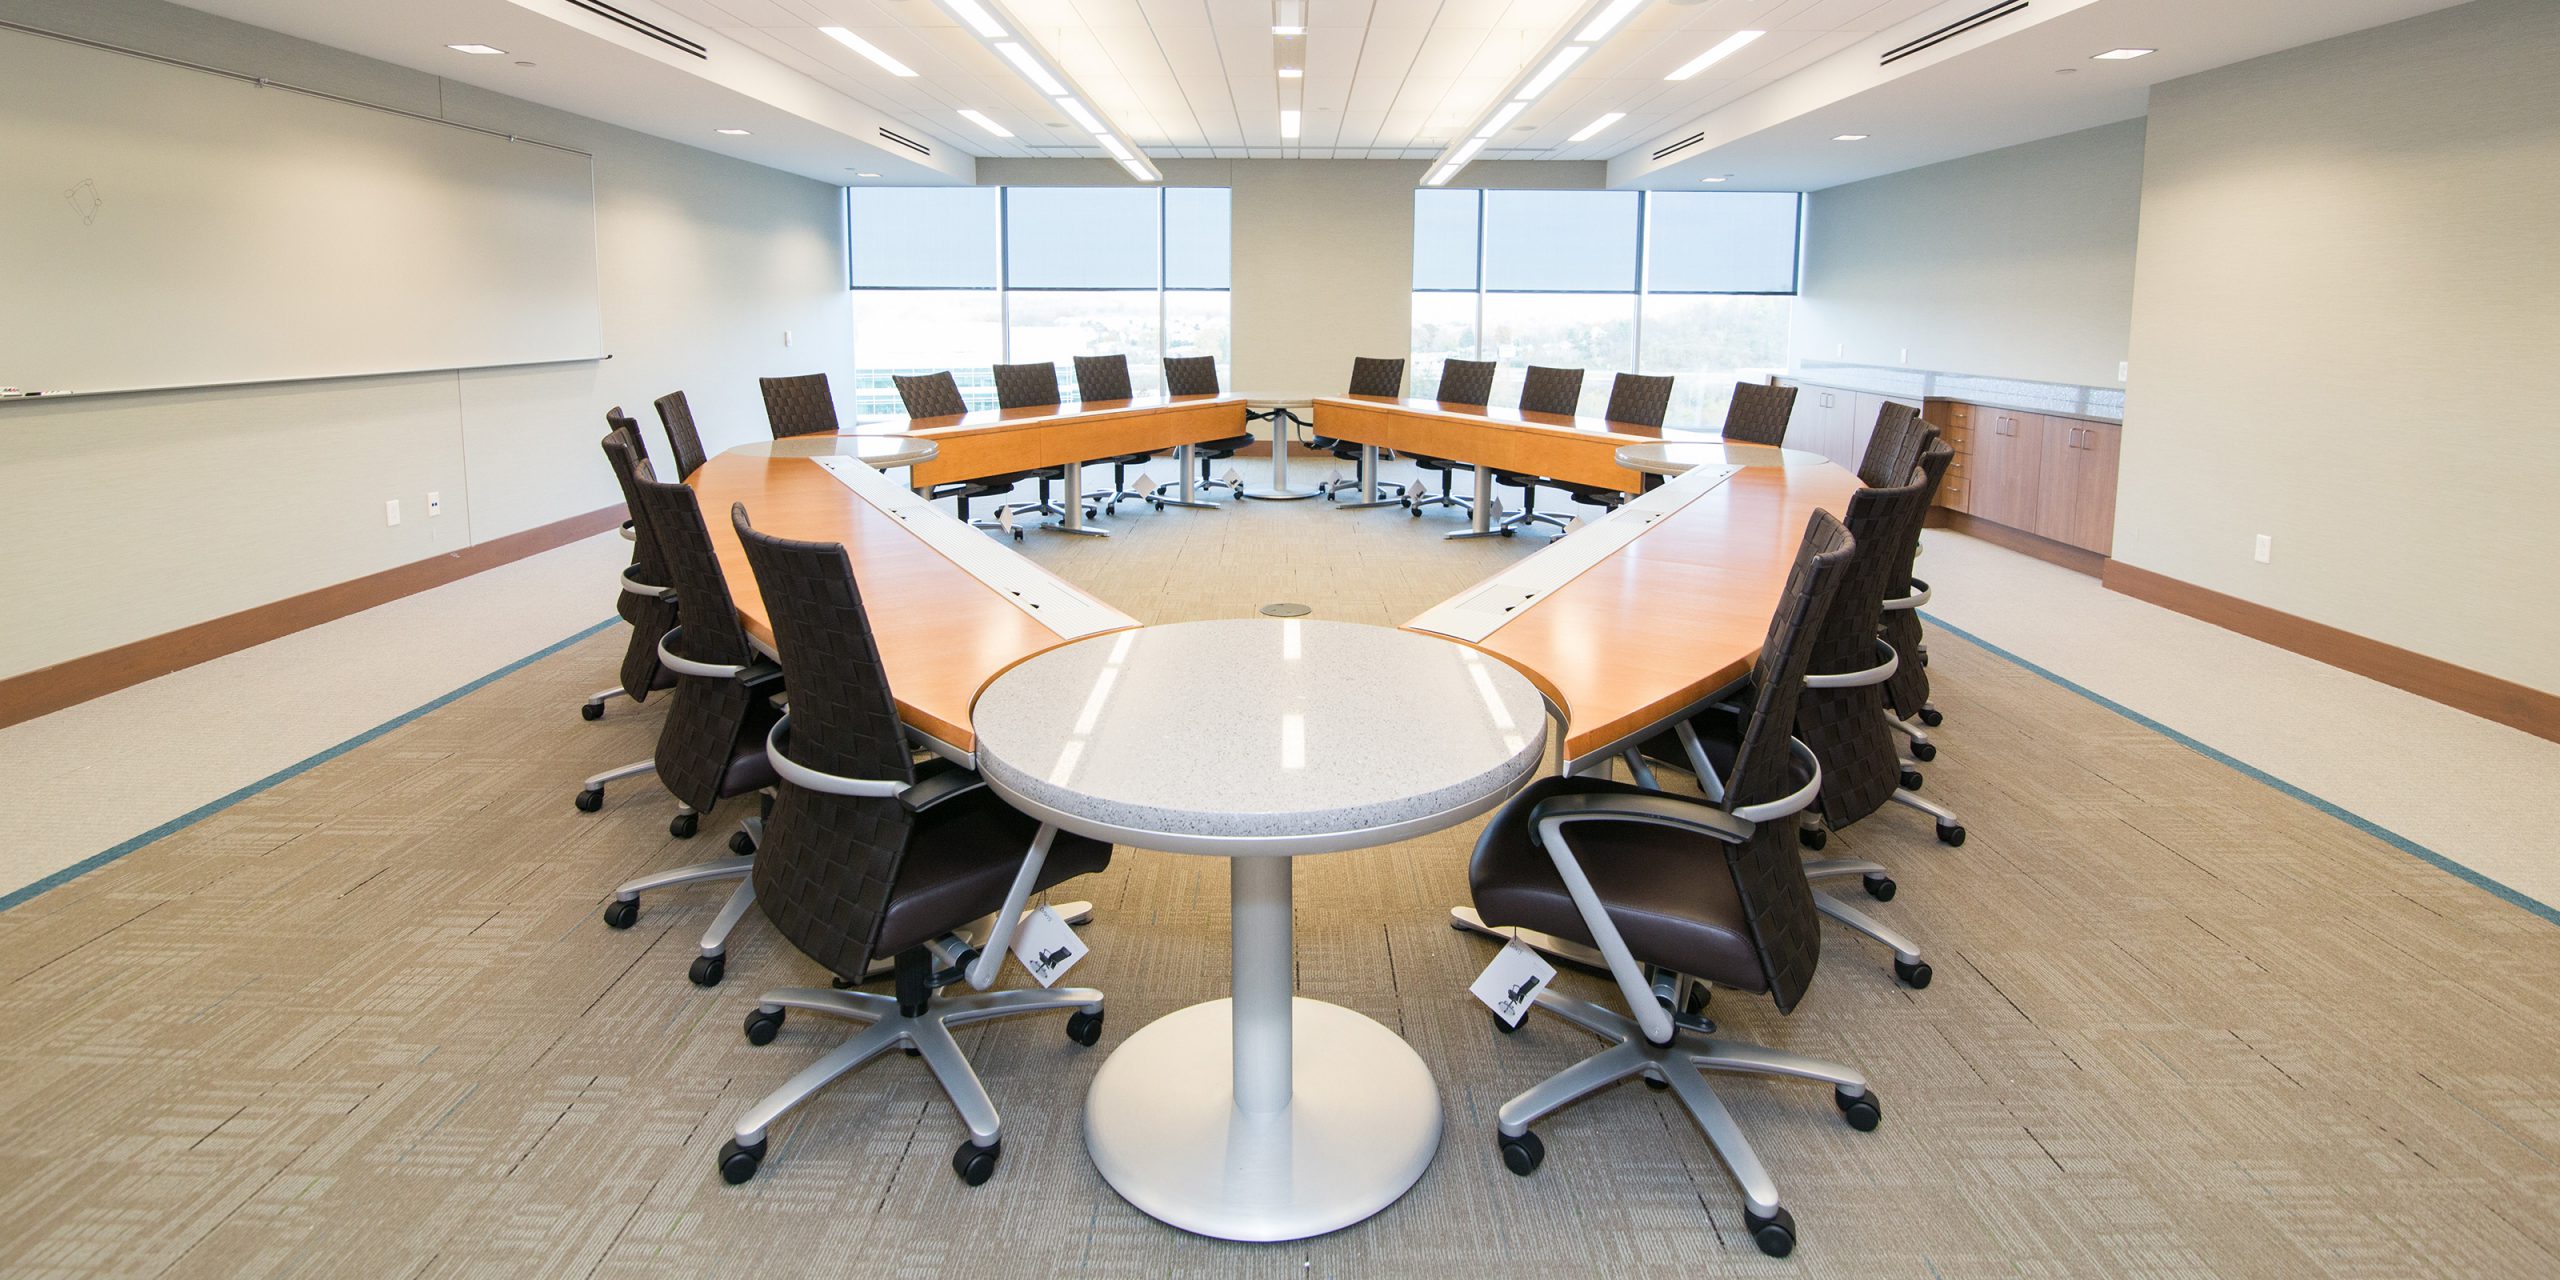 large conference table with many desk chairs around it